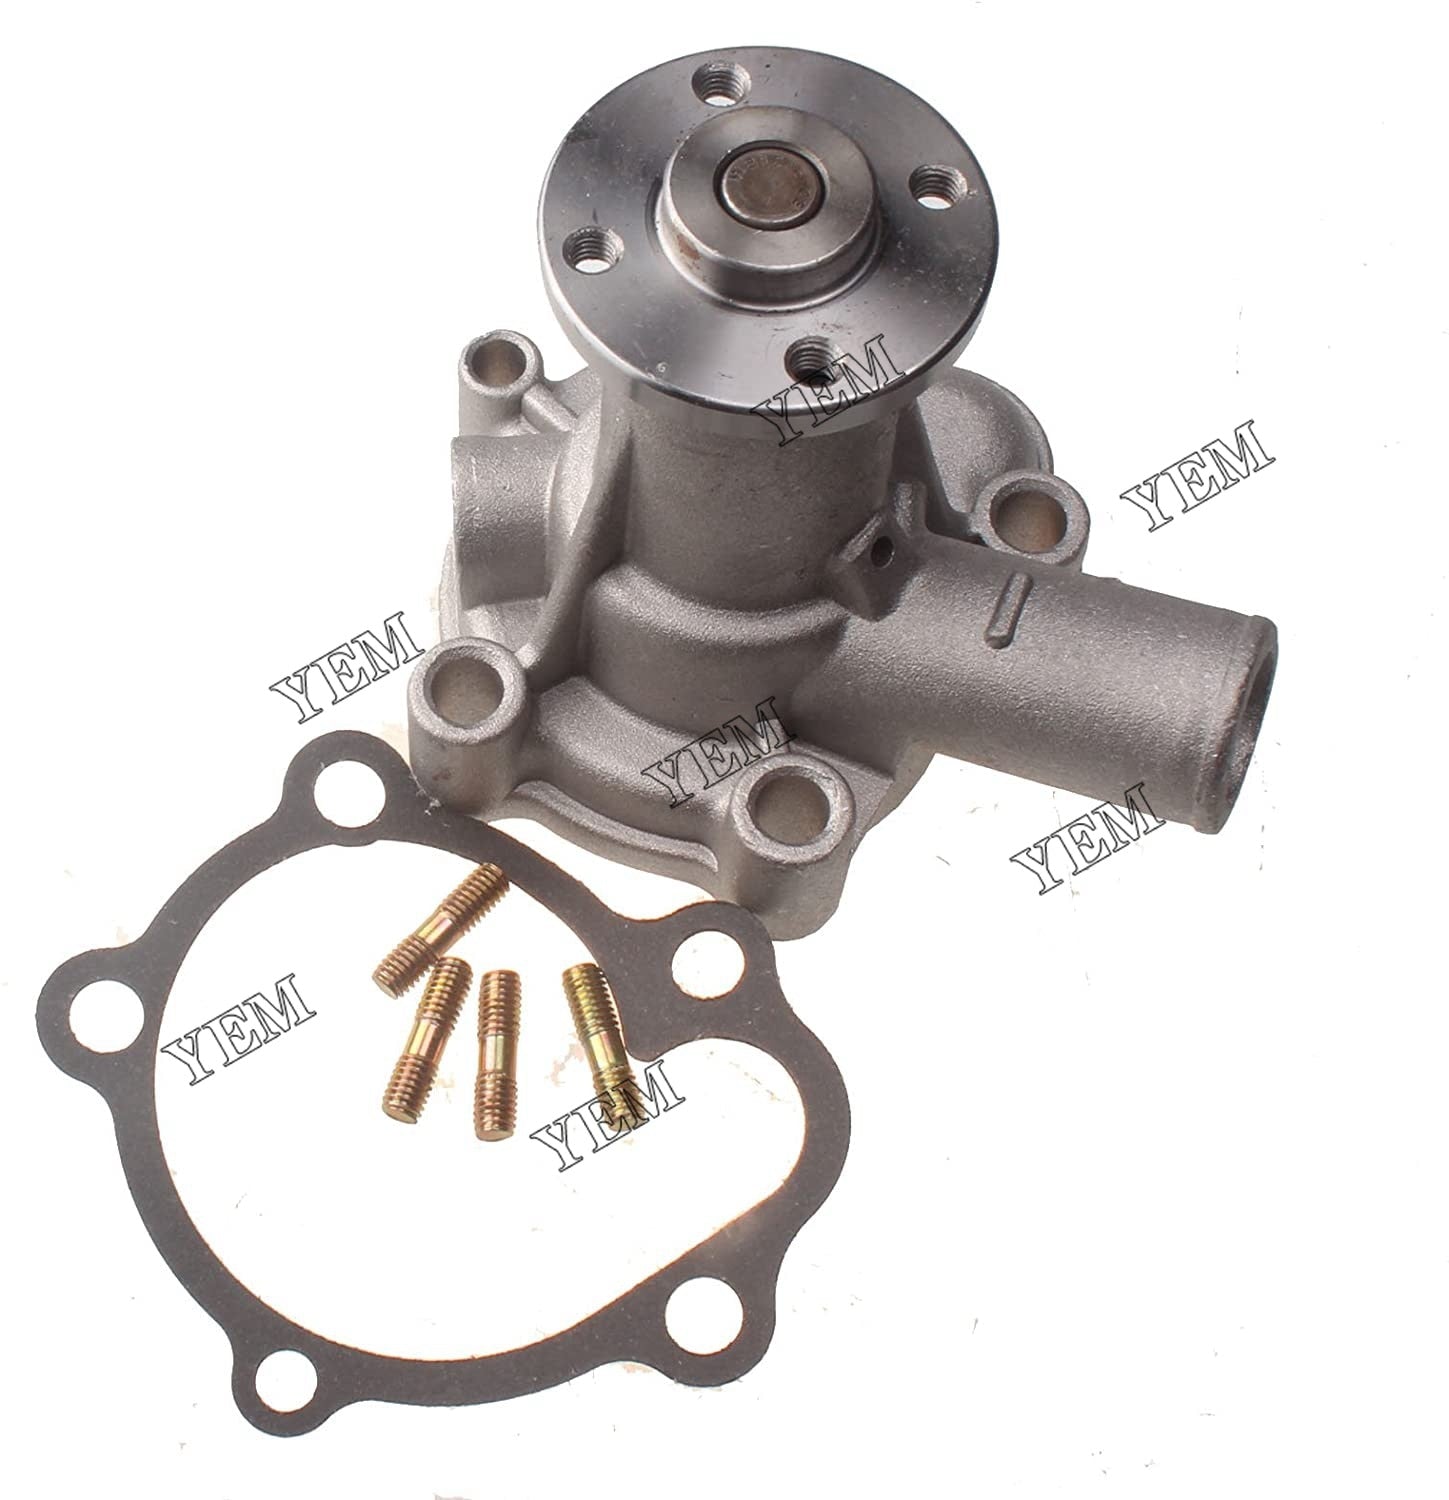 YEM Engine Parts Water Pump 11-9498 13-508 For Yanmar Thermo King 2.35 3.53 For Yanmar